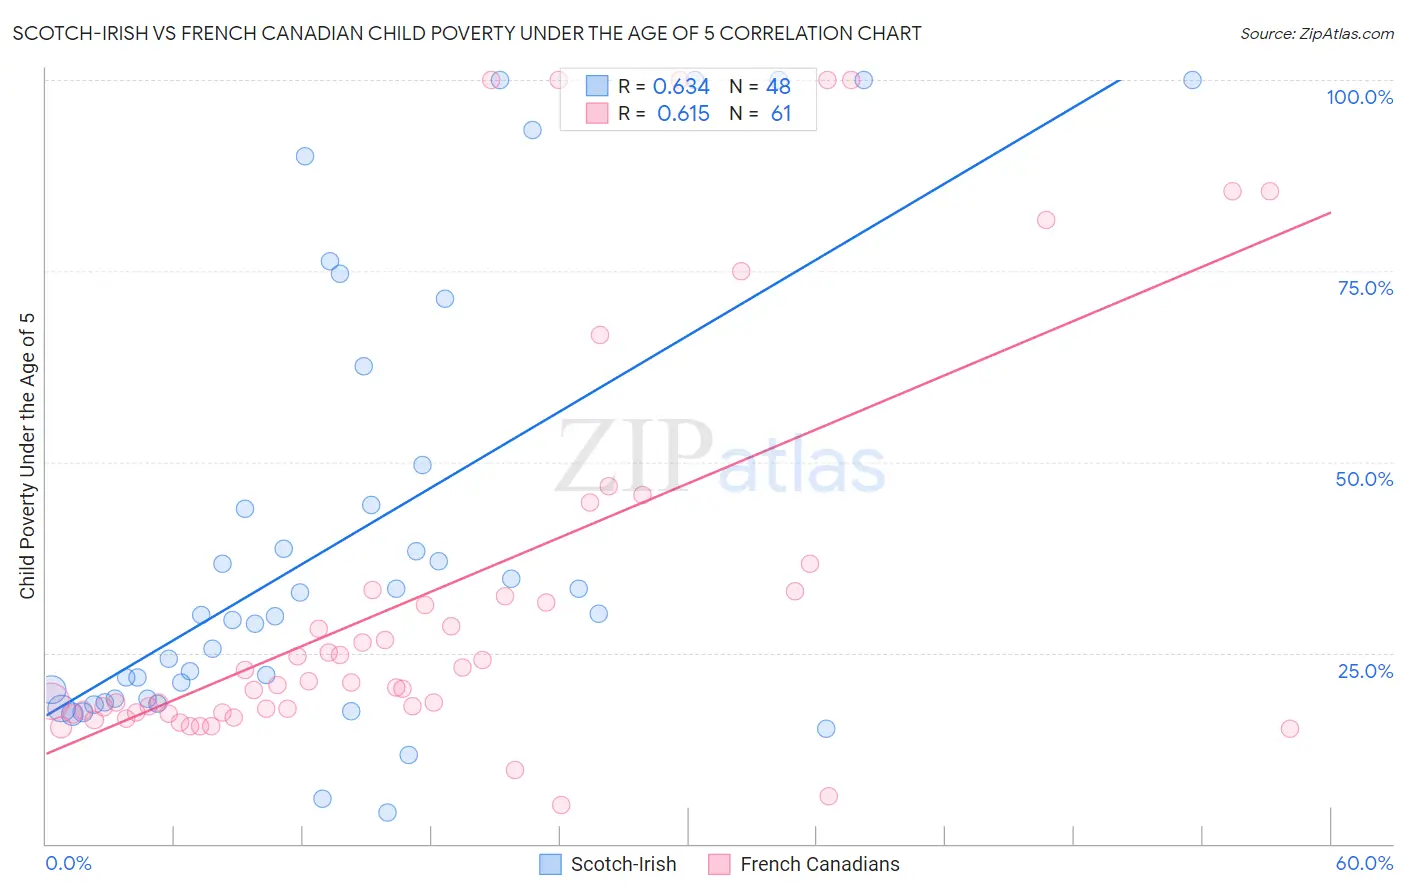 Scotch-Irish vs French Canadian Child Poverty Under the Age of 5